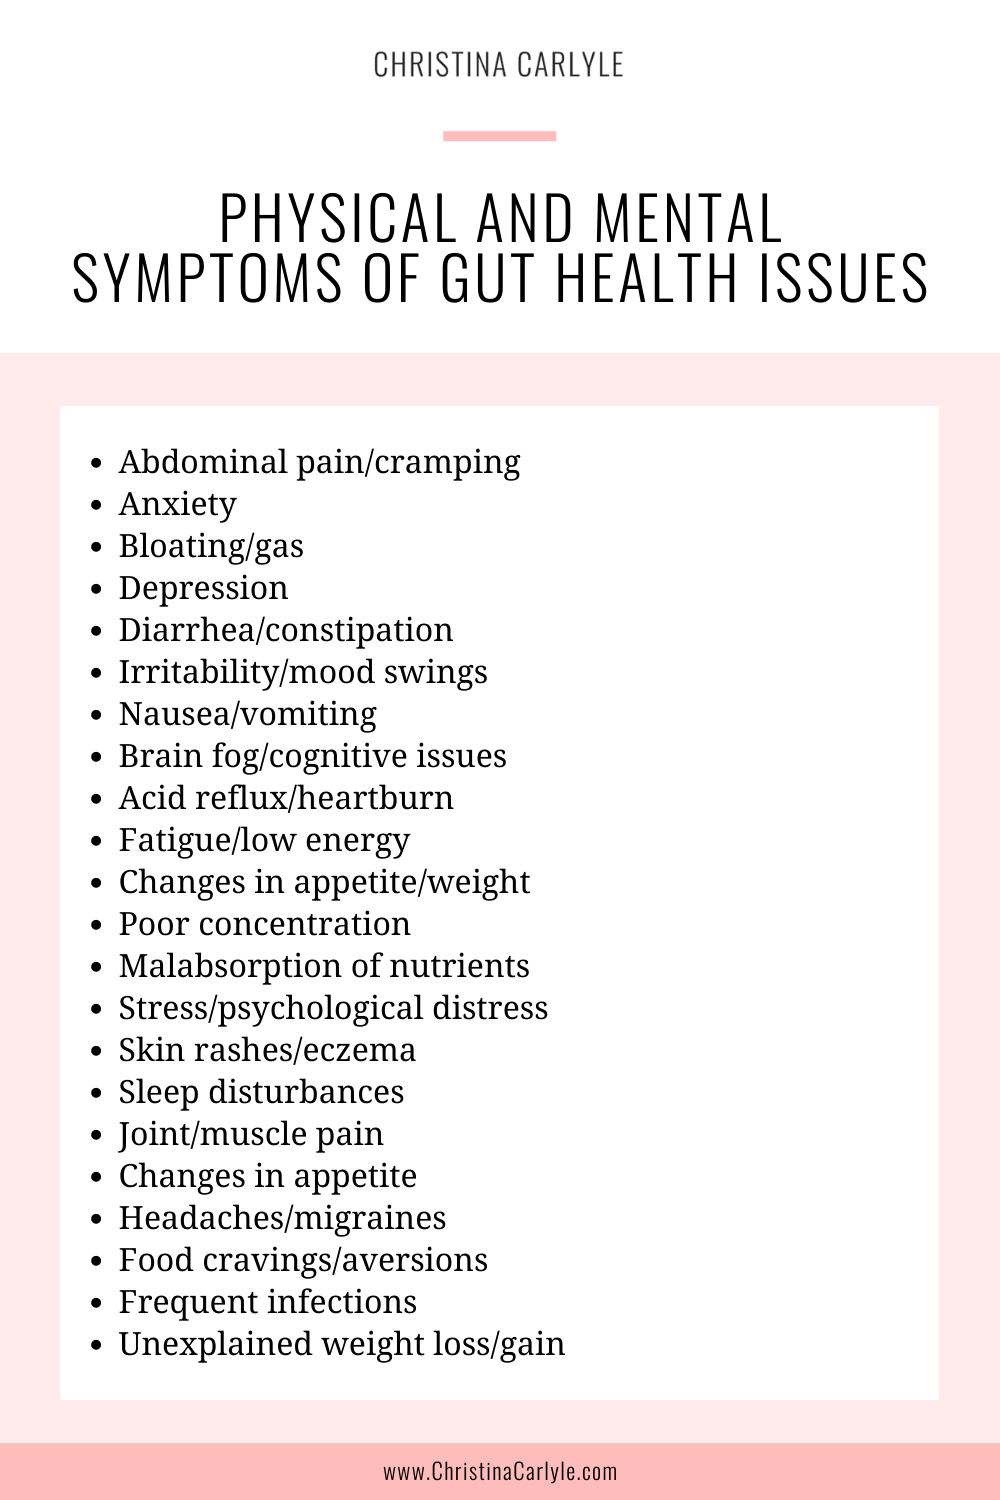 a list of physical and mental symptoms of gut health issues